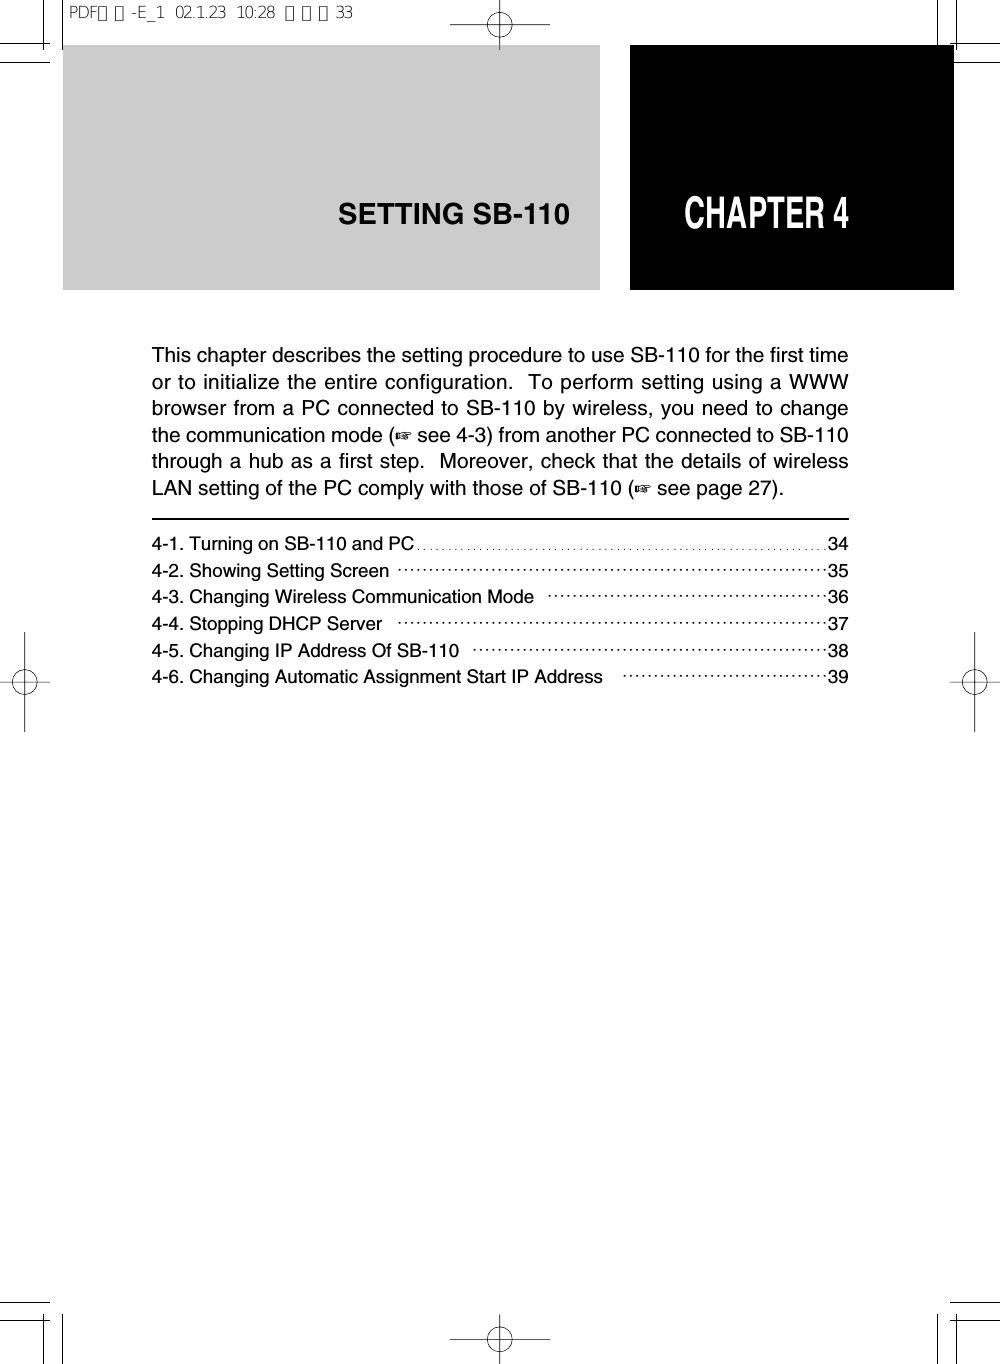 CHAPTER 4SETTING SB-110This chapter describes the setting procedure to use SB-110 for the first timeor to initialize the entire configuration.  To perform setting using a WWWbrowser from a PC connected to SB-110 by wireless, you need to changethe communication mode (☞see 4-3) from another PC connected to SB-110through a hub as a first step.  Moreover, check that the details of wirelessLAN setting of the PC comply with those of SB-110 (☞see page 27).4-1. Turning on SB-110 and PC…………………………………………………………344-2. Showing Setting Screen ……………………………………………………………354-3. Changing Wireless Communication Mode ………………………………………364-4. Stopping DHCP Server ……………………………………………………………374-5. Changing IP Address Of SB-110 …………………………………………………384-6. Changing Automatic Assignment Start IP Address ……………………………39PDF取説-E_1  02.1.23  10:28  ページ33